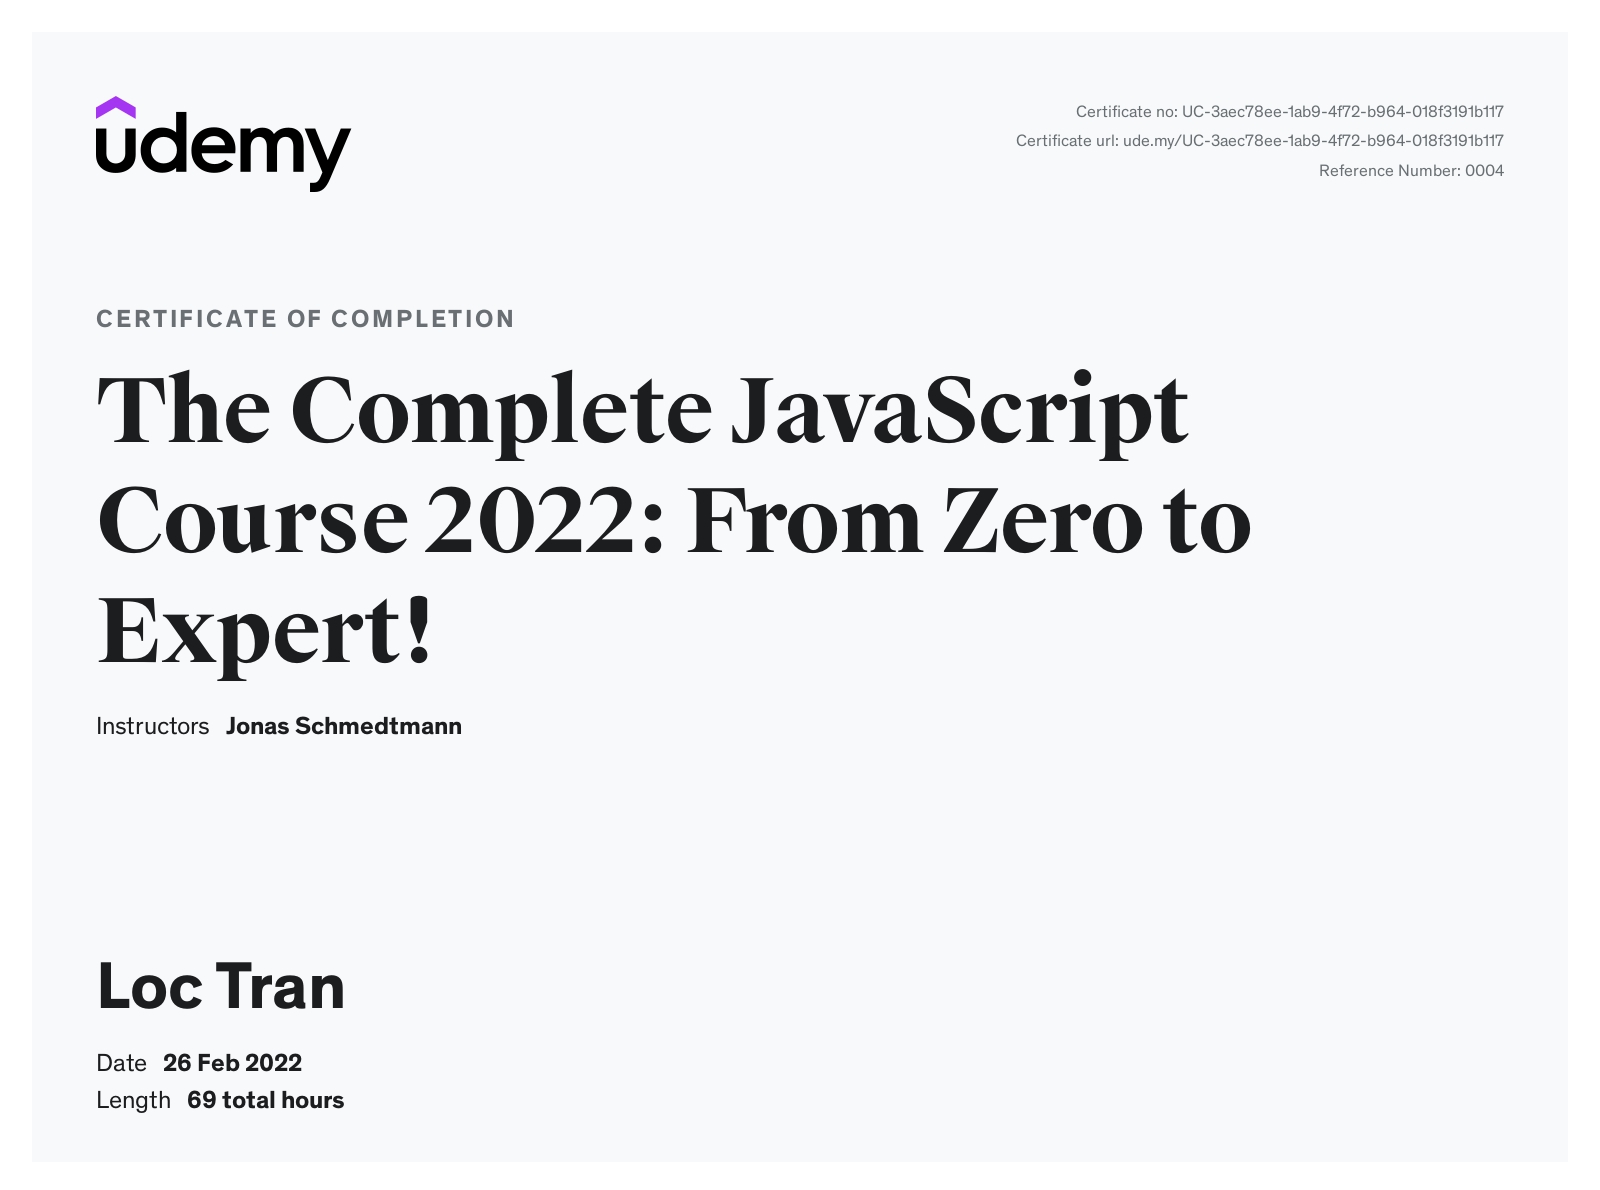 The Complete JavaScript Course 2022: From Zero to Expert